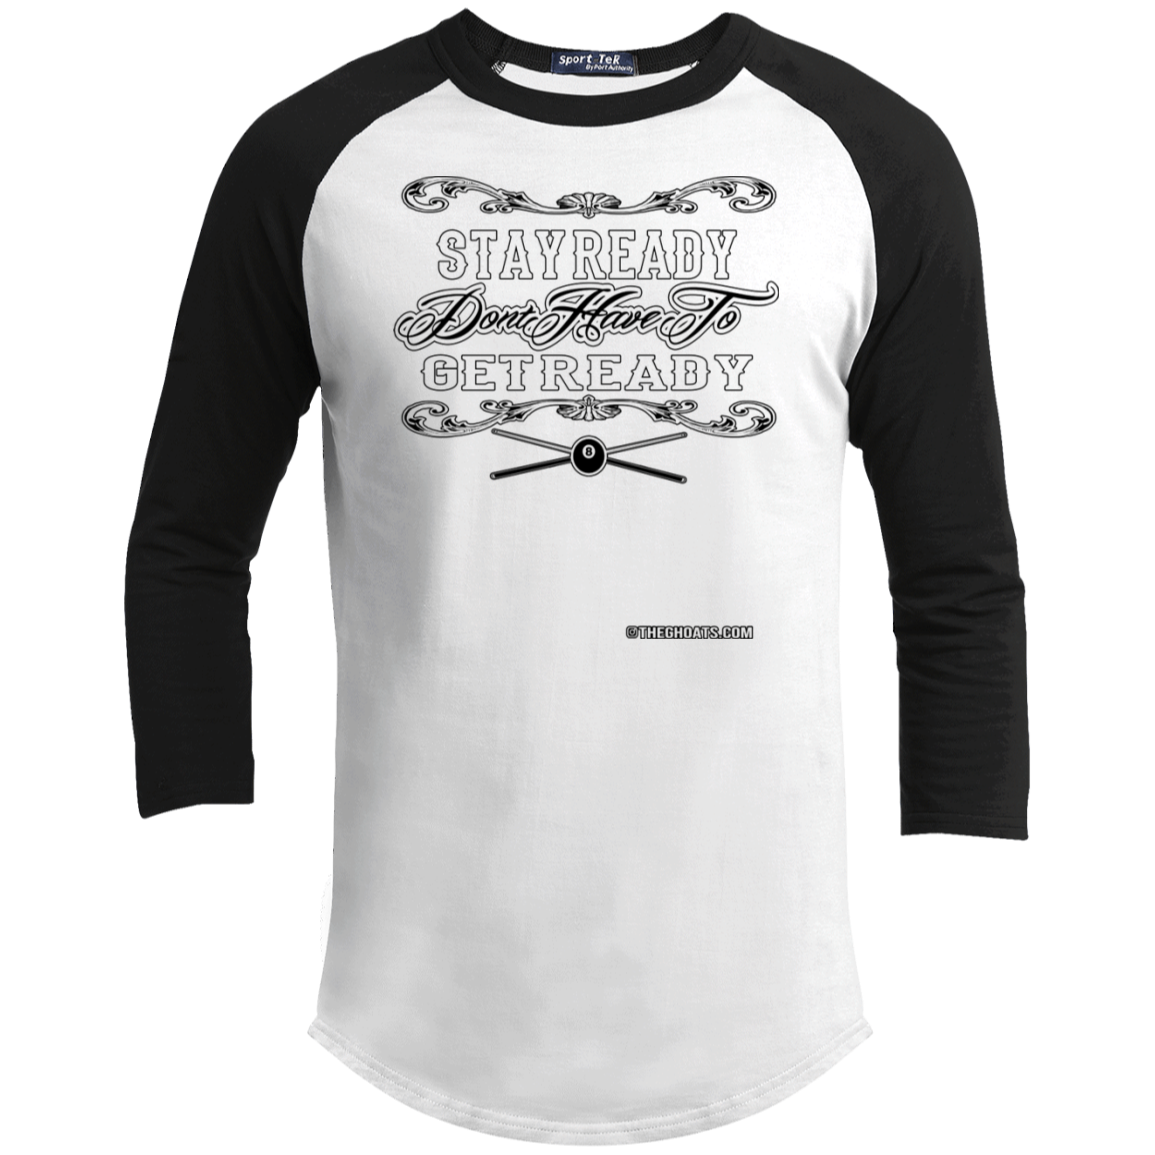 The GHOATS Custom Design #36. Stay Ready Don't Have to Get Ready. Ver 2/2. Youth 3/4 Raglan Sleeve Shirt